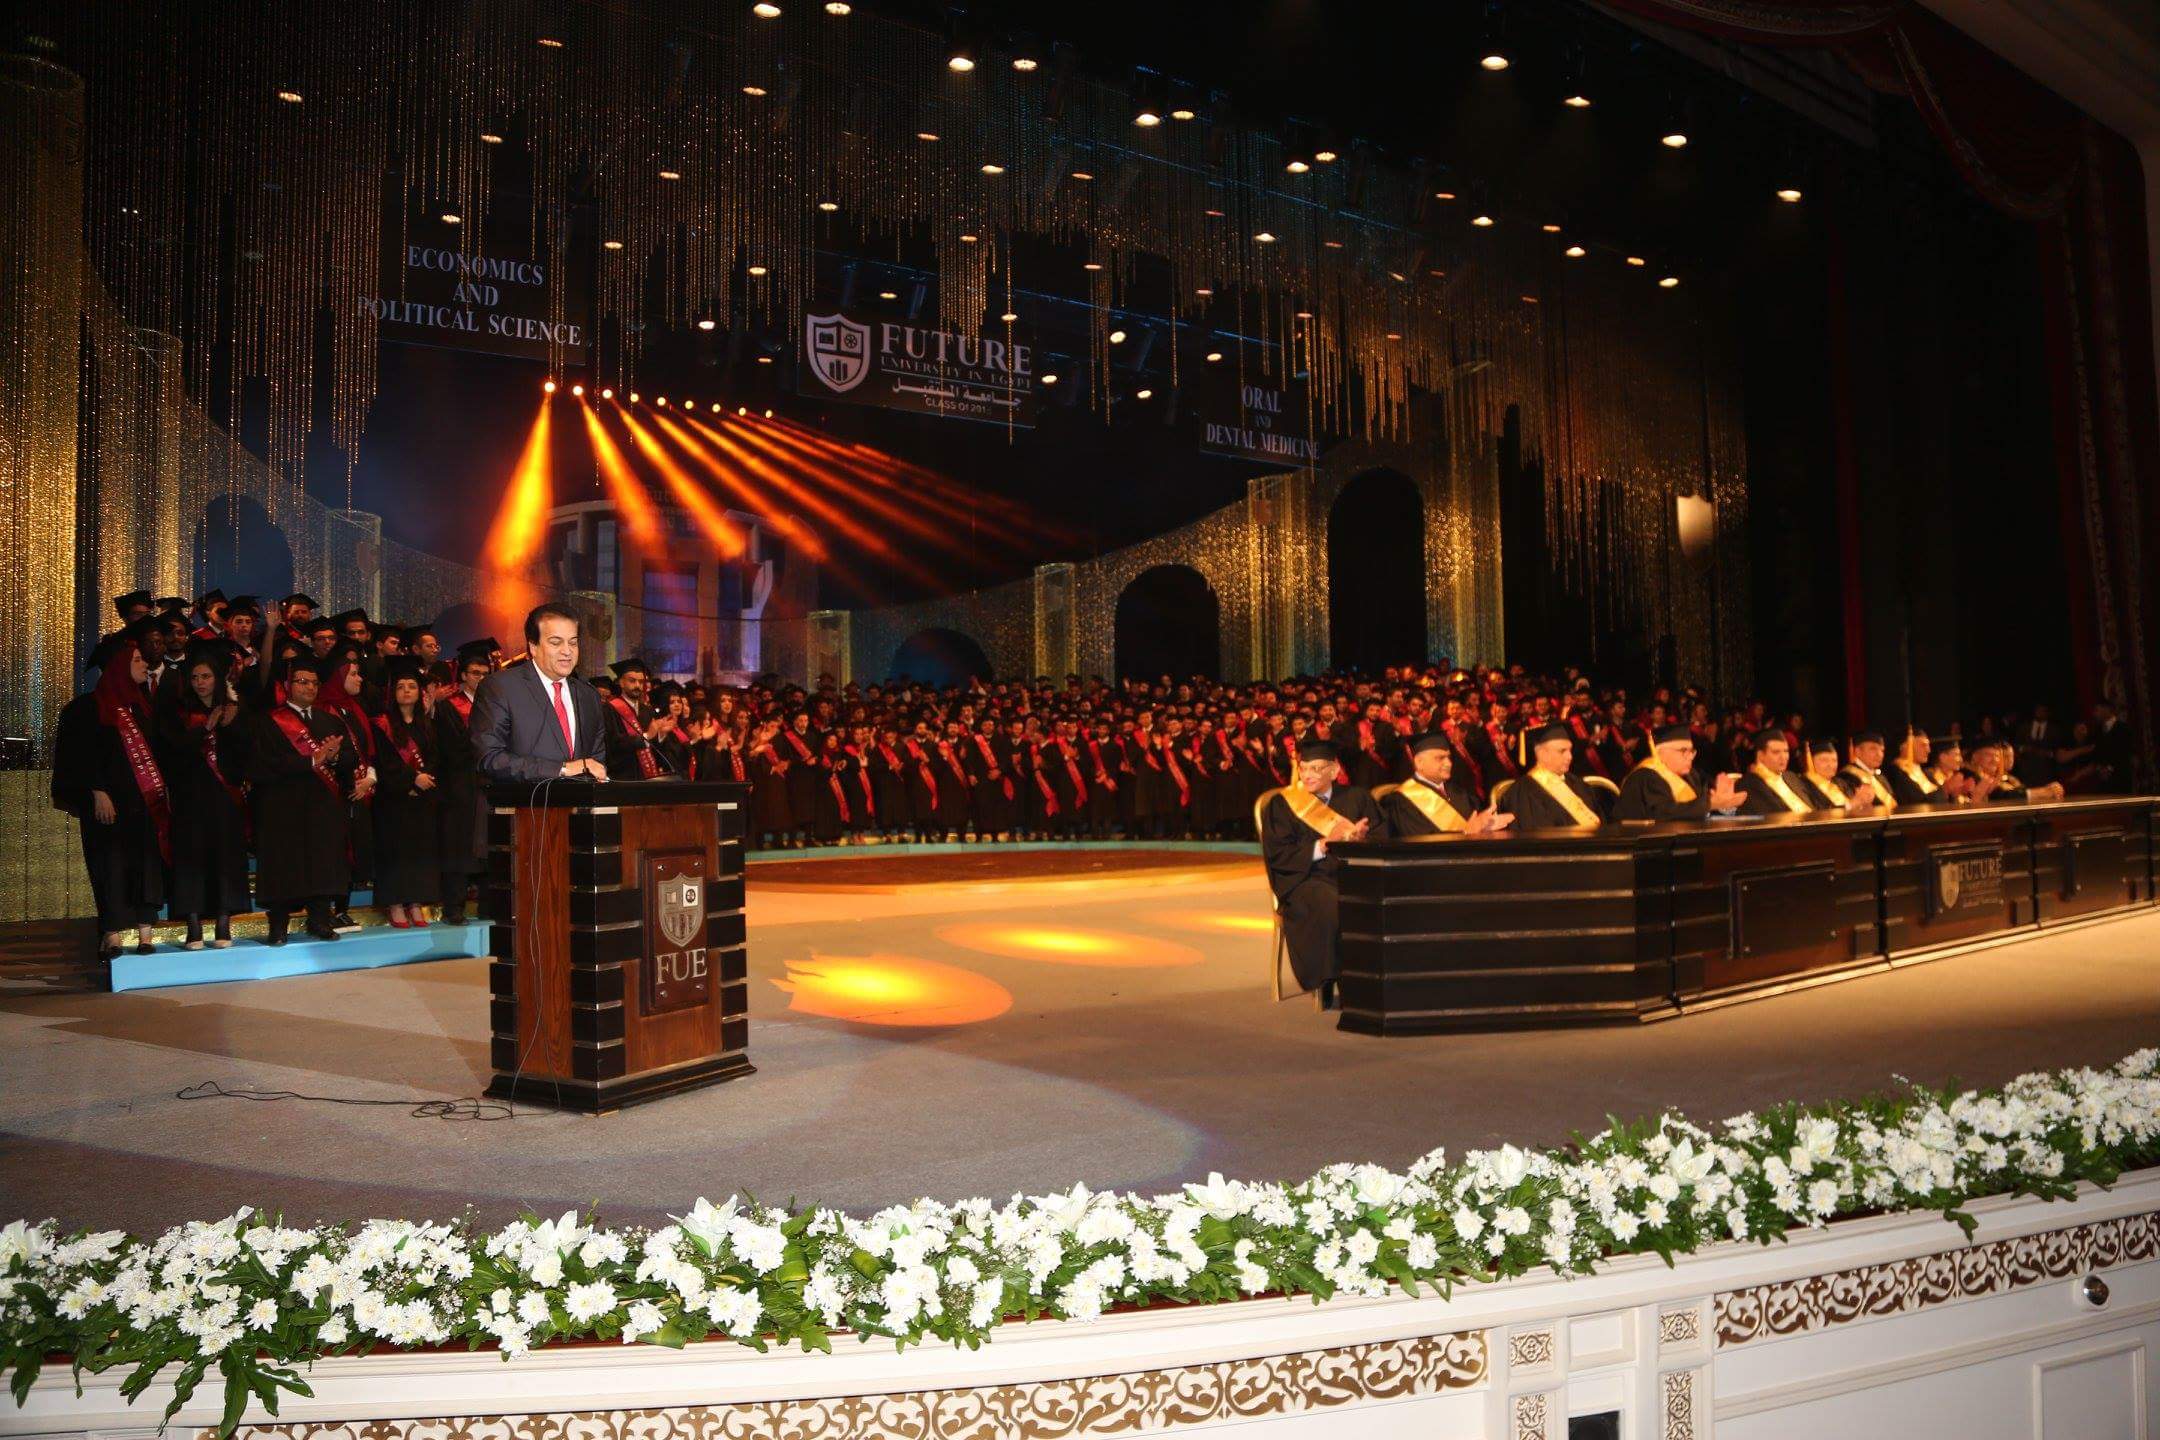 The Minister of Higher Education attends the graduation ceremony of the students of the University of the Future